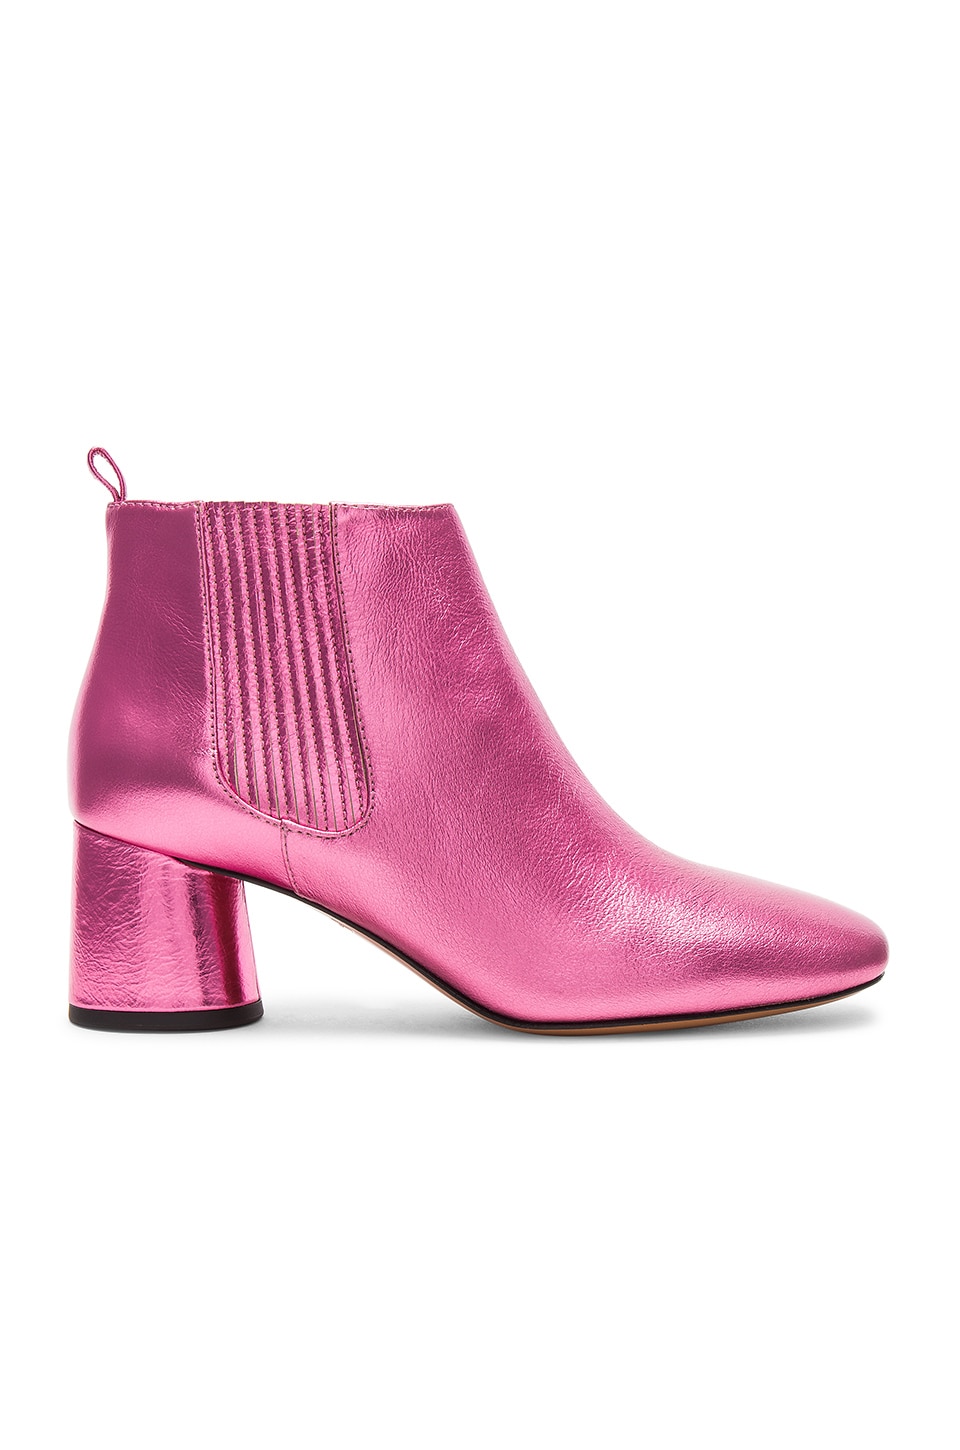 Marc Jacobs Rocket Chelsea Boot in Pink | REVOLVE